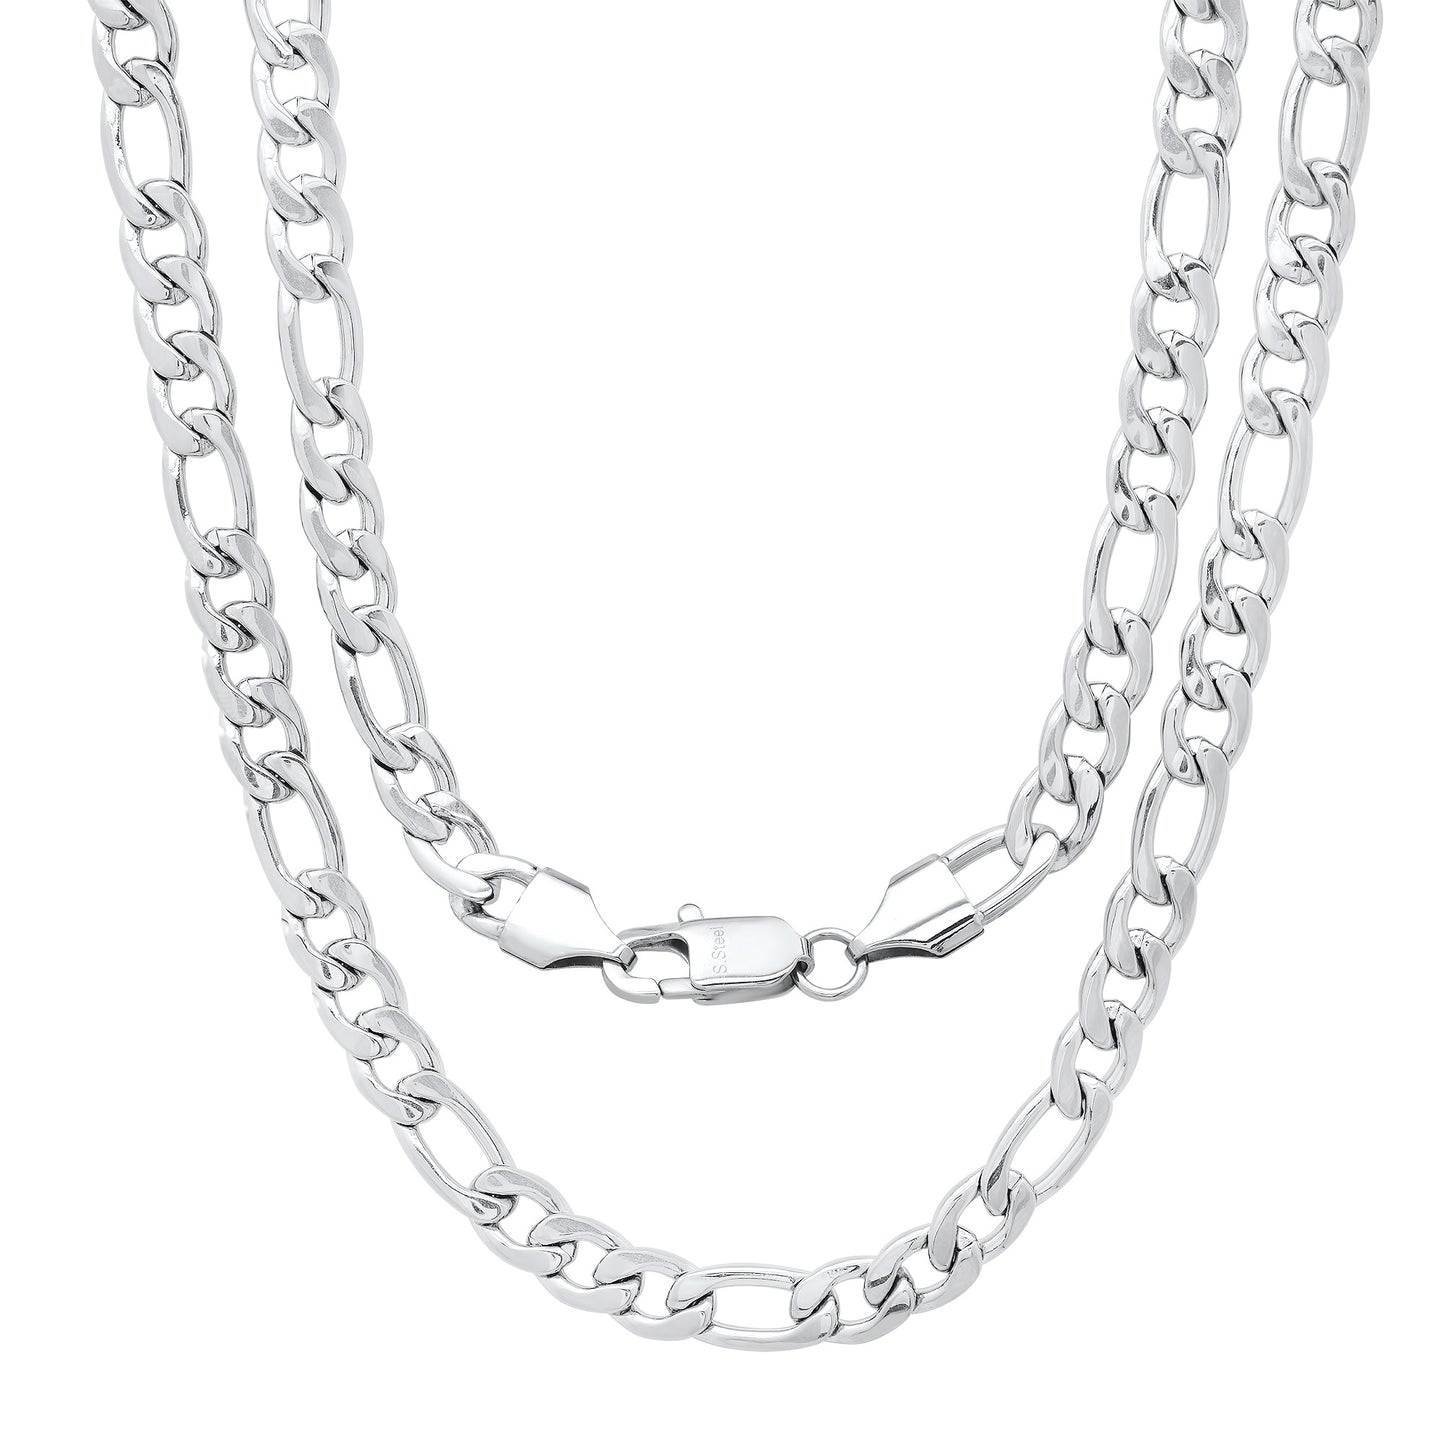 Men's 6.7mm High-Polished Stainless Steel Flat Figaro Chain Necklace, 24 (SKU: ST-SD1014)